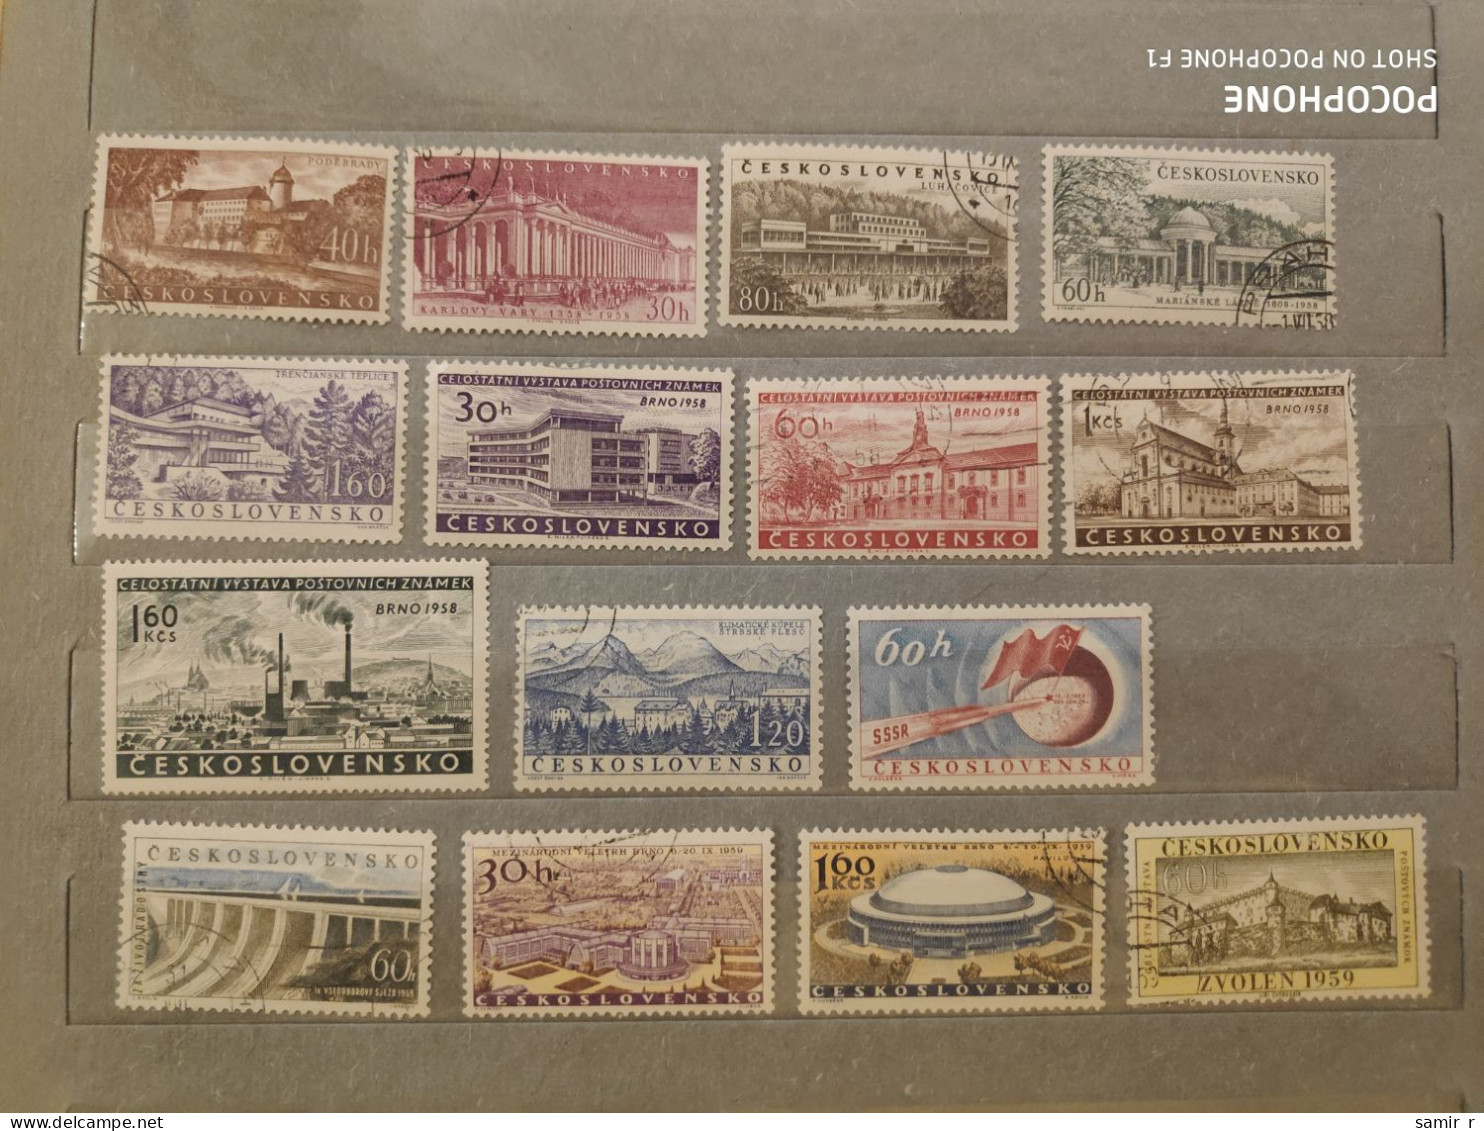 Czechoslovakia	Architecture (F96) - Used Stamps